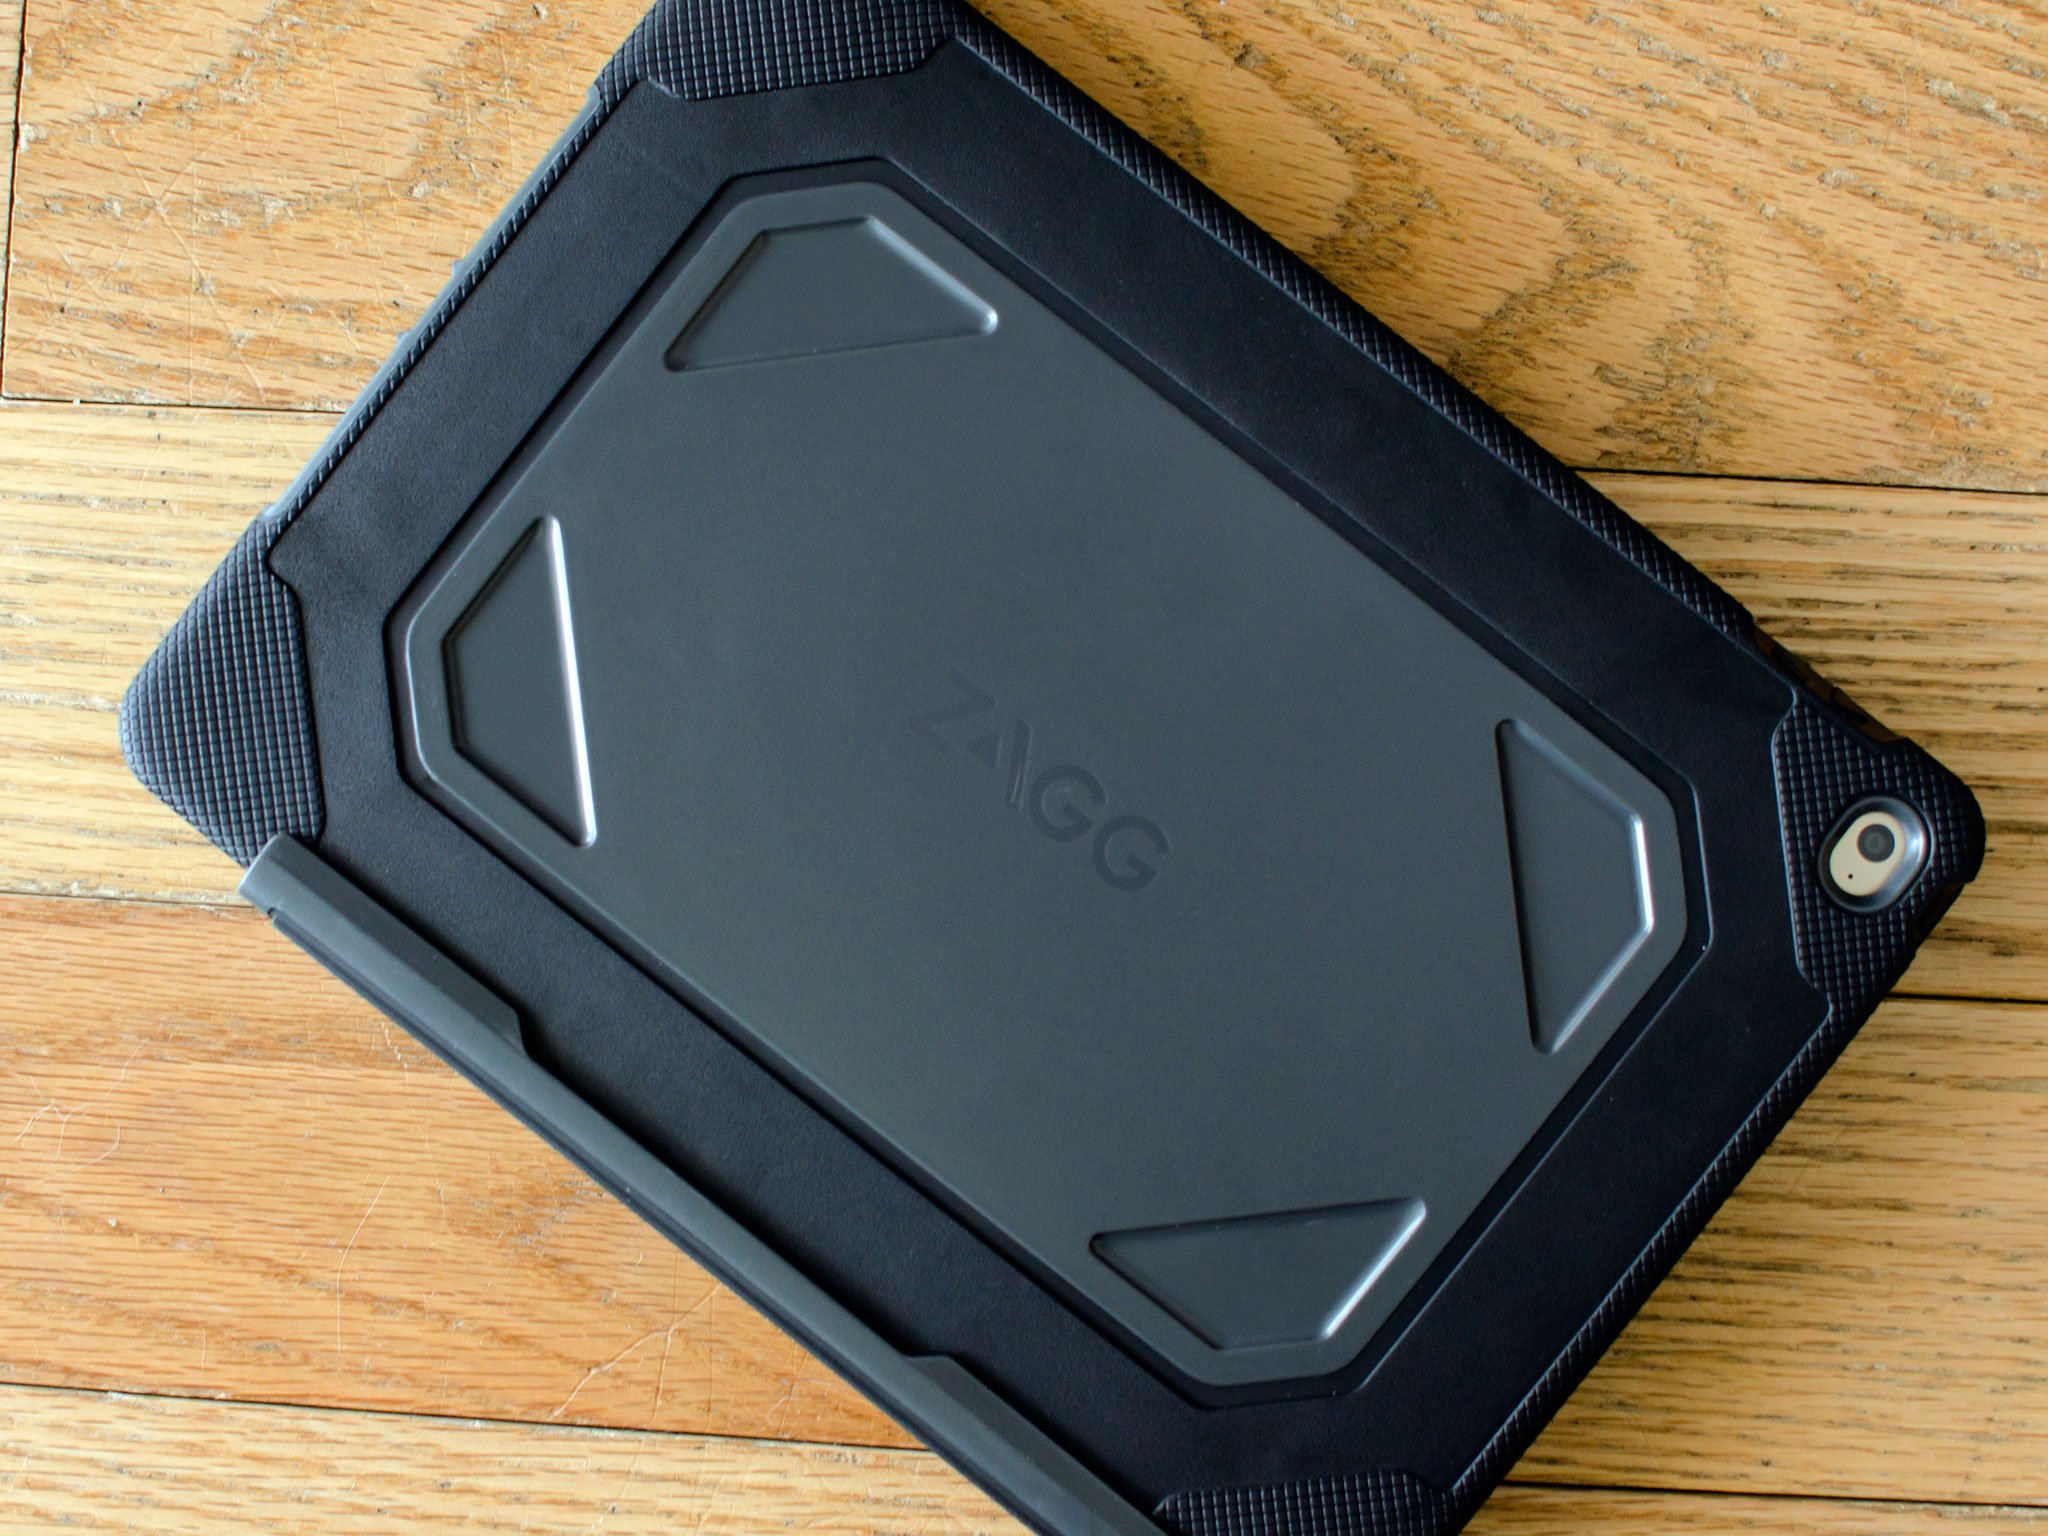 Zagg Rugged Book keyboard case for iPad Air 2 review